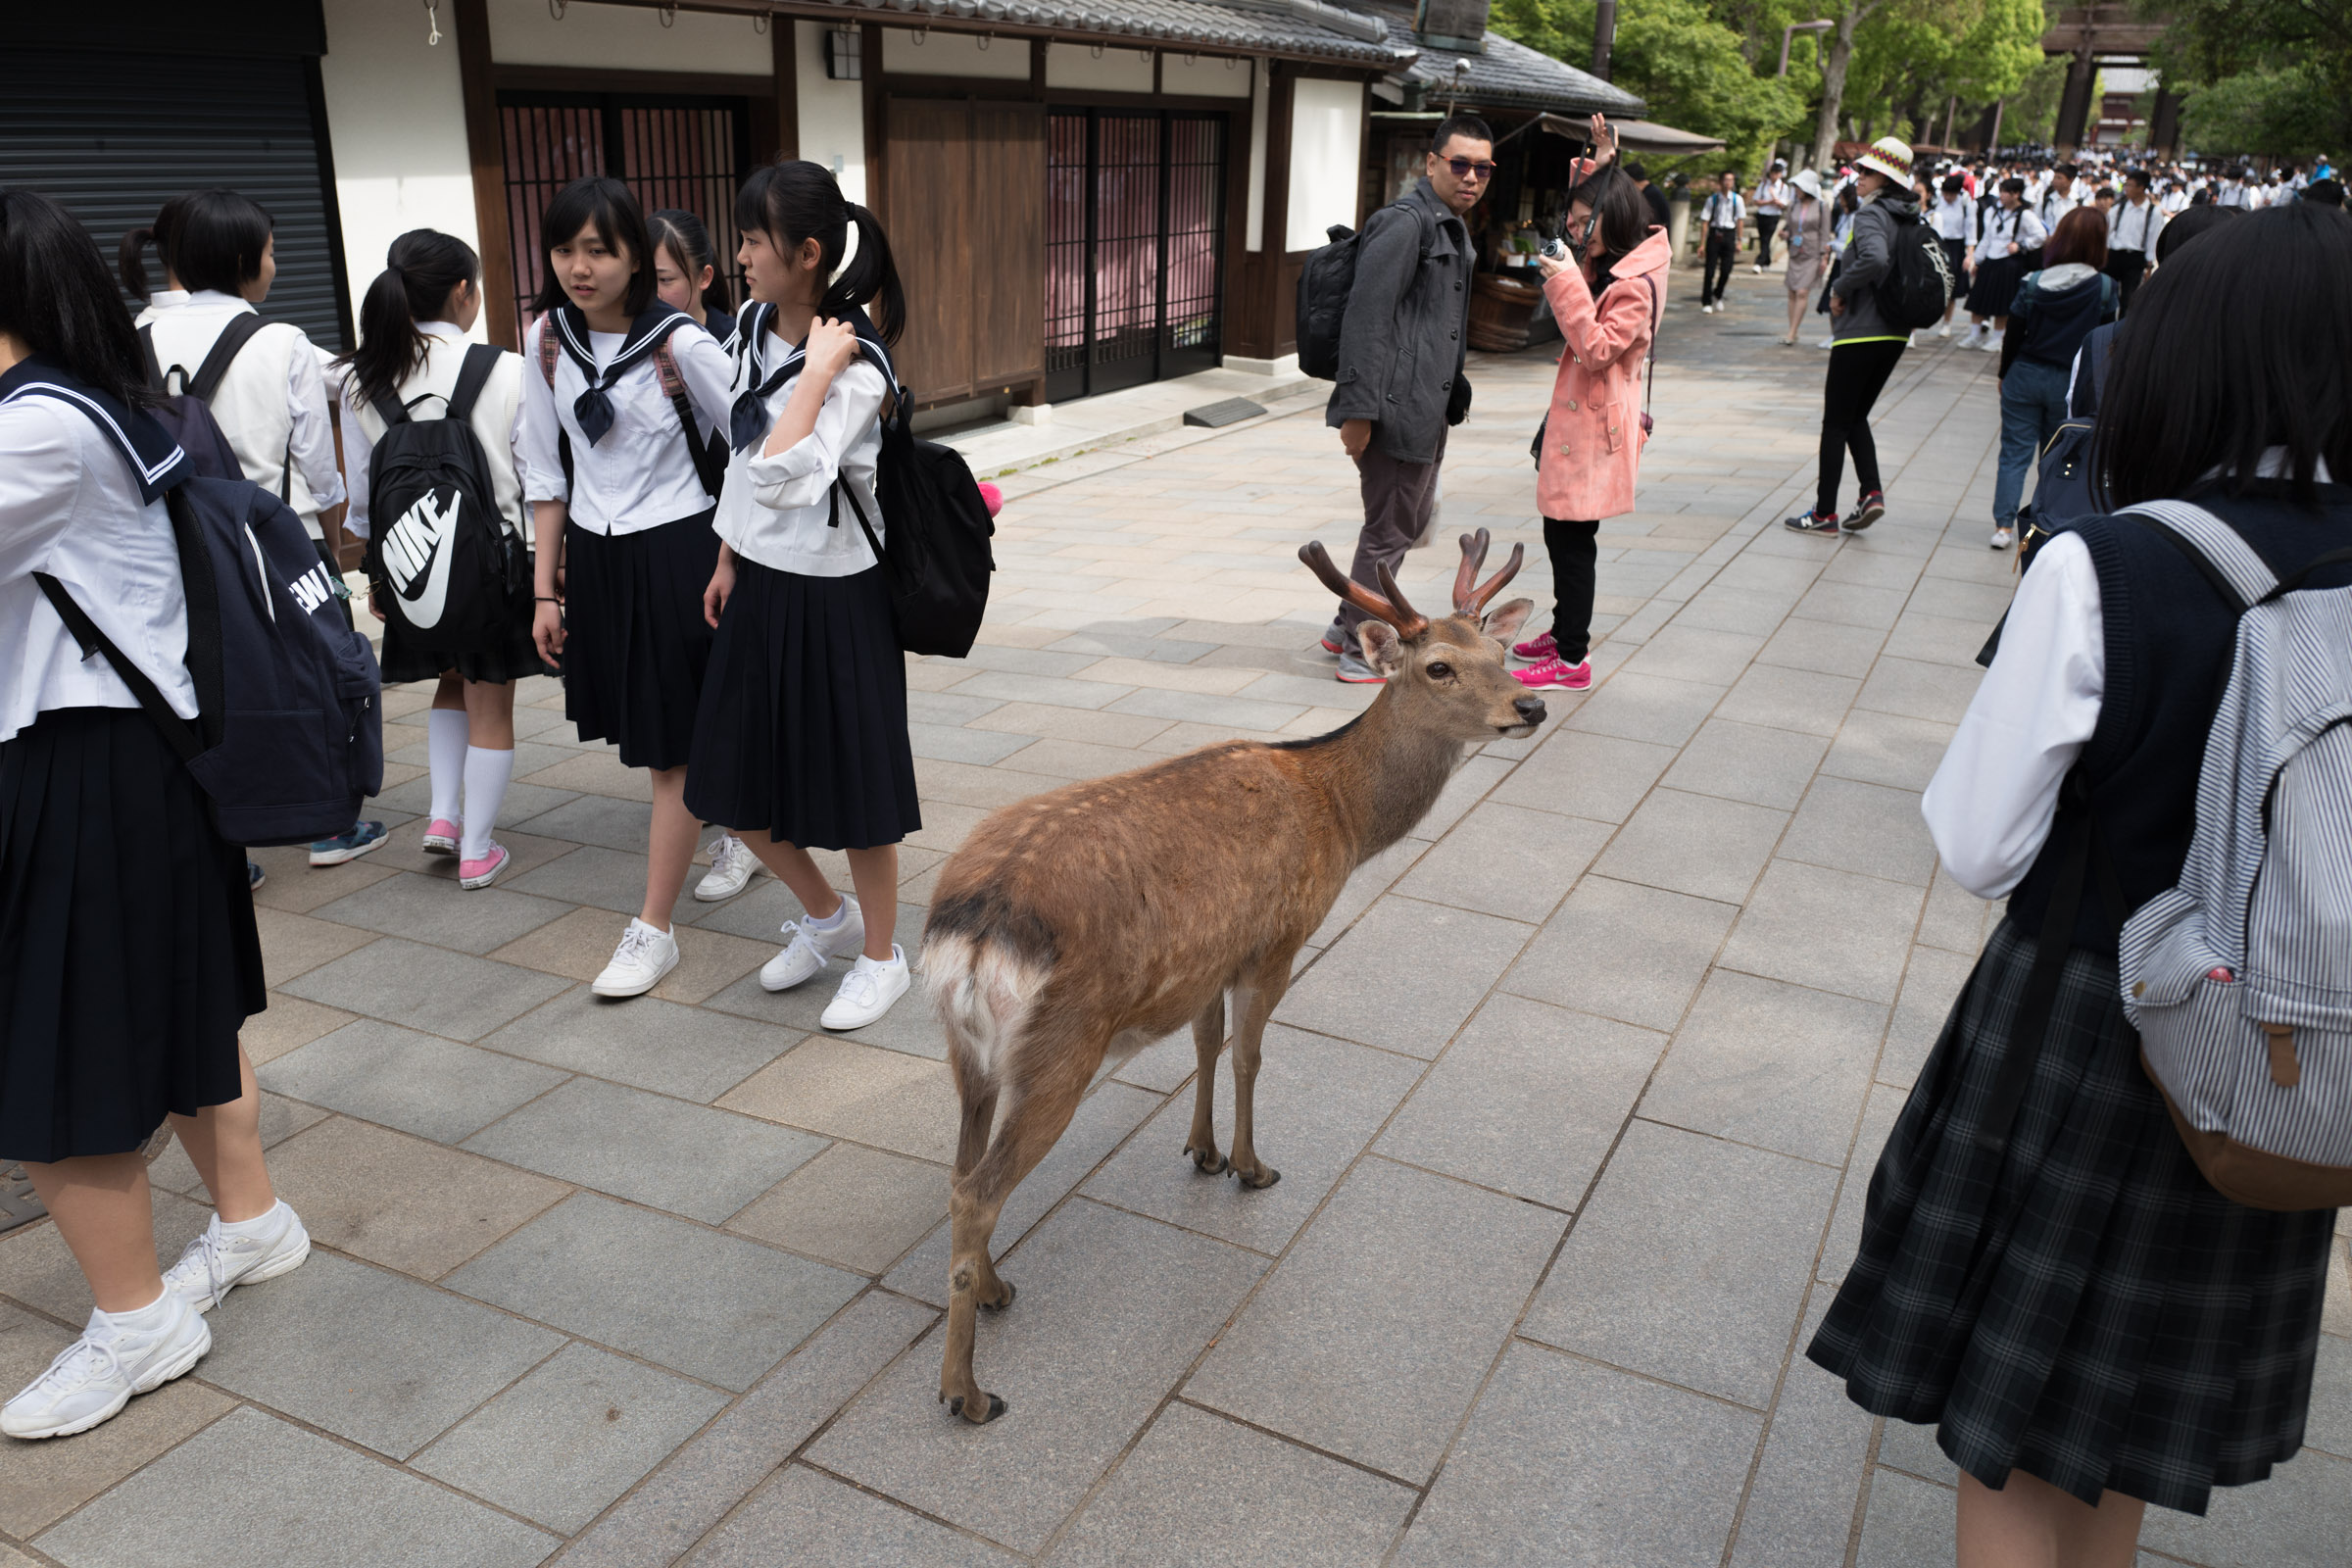 A deer standing amongst a bunch of students